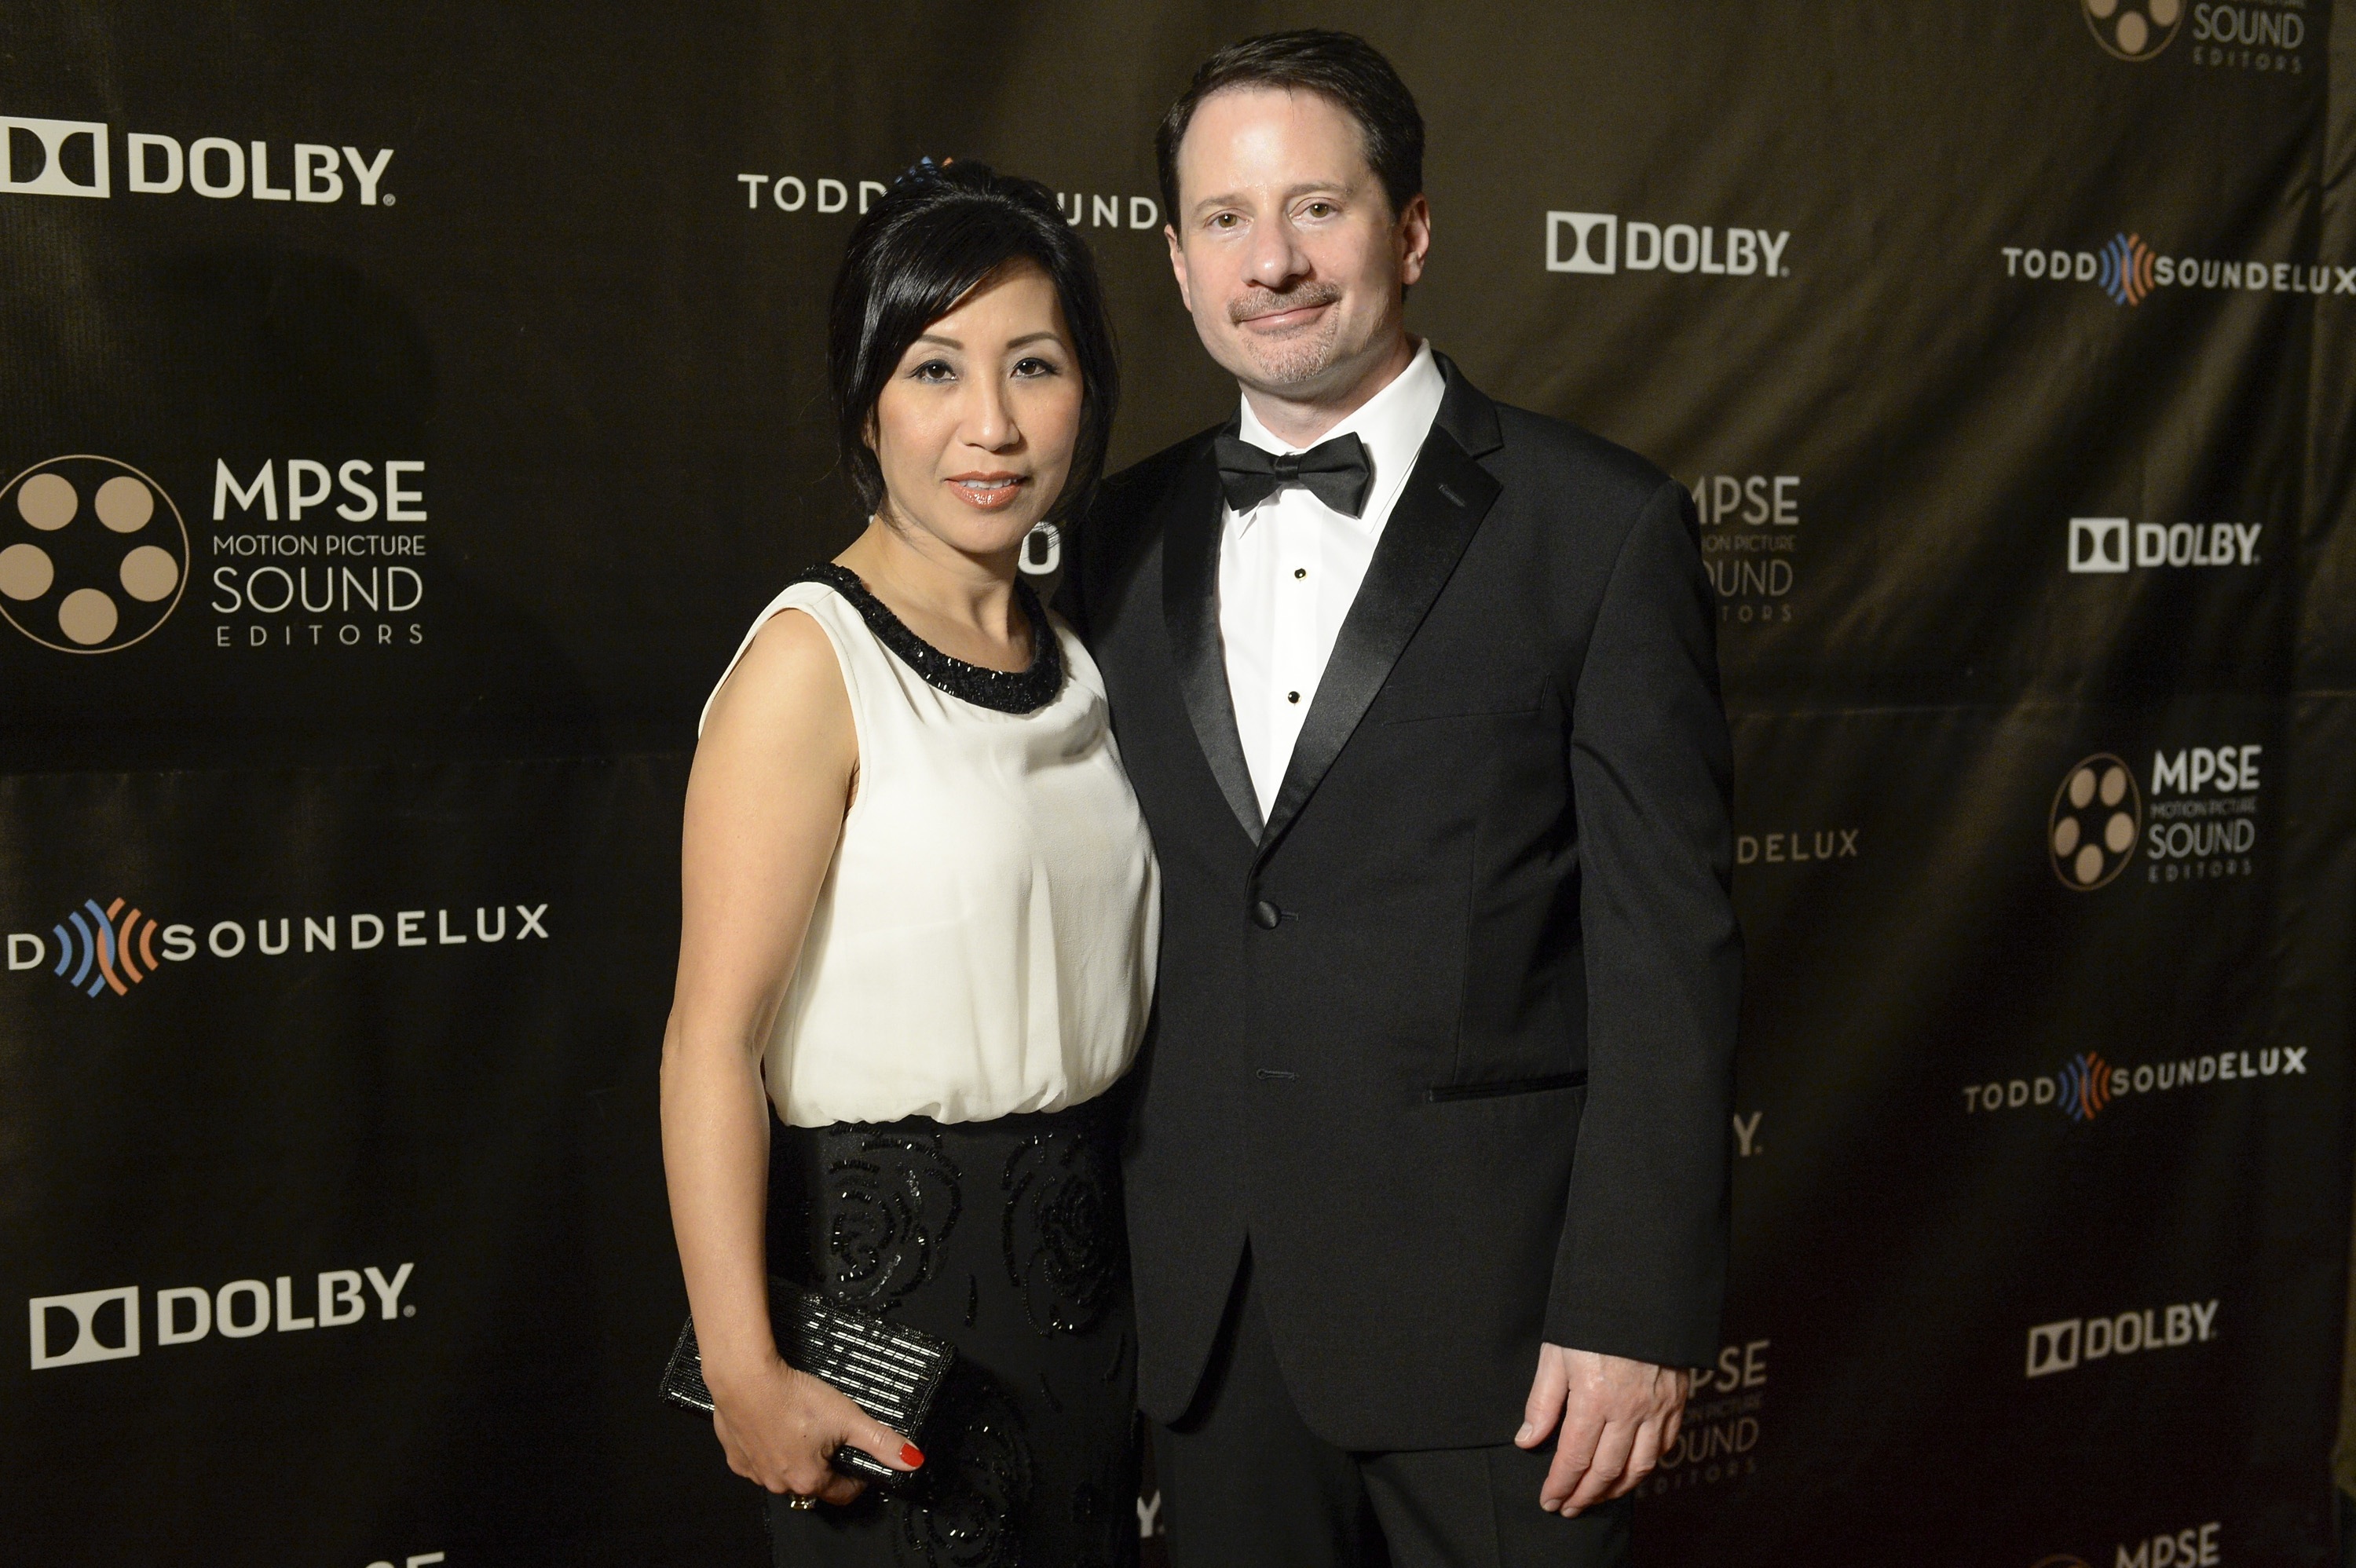 Andrew Silver and Jessie Pham at the 2014 Motion Picture Sound Editors' Golden Reel Awards. Andrew was nominated for Best Music Editing in a Feature Film for 